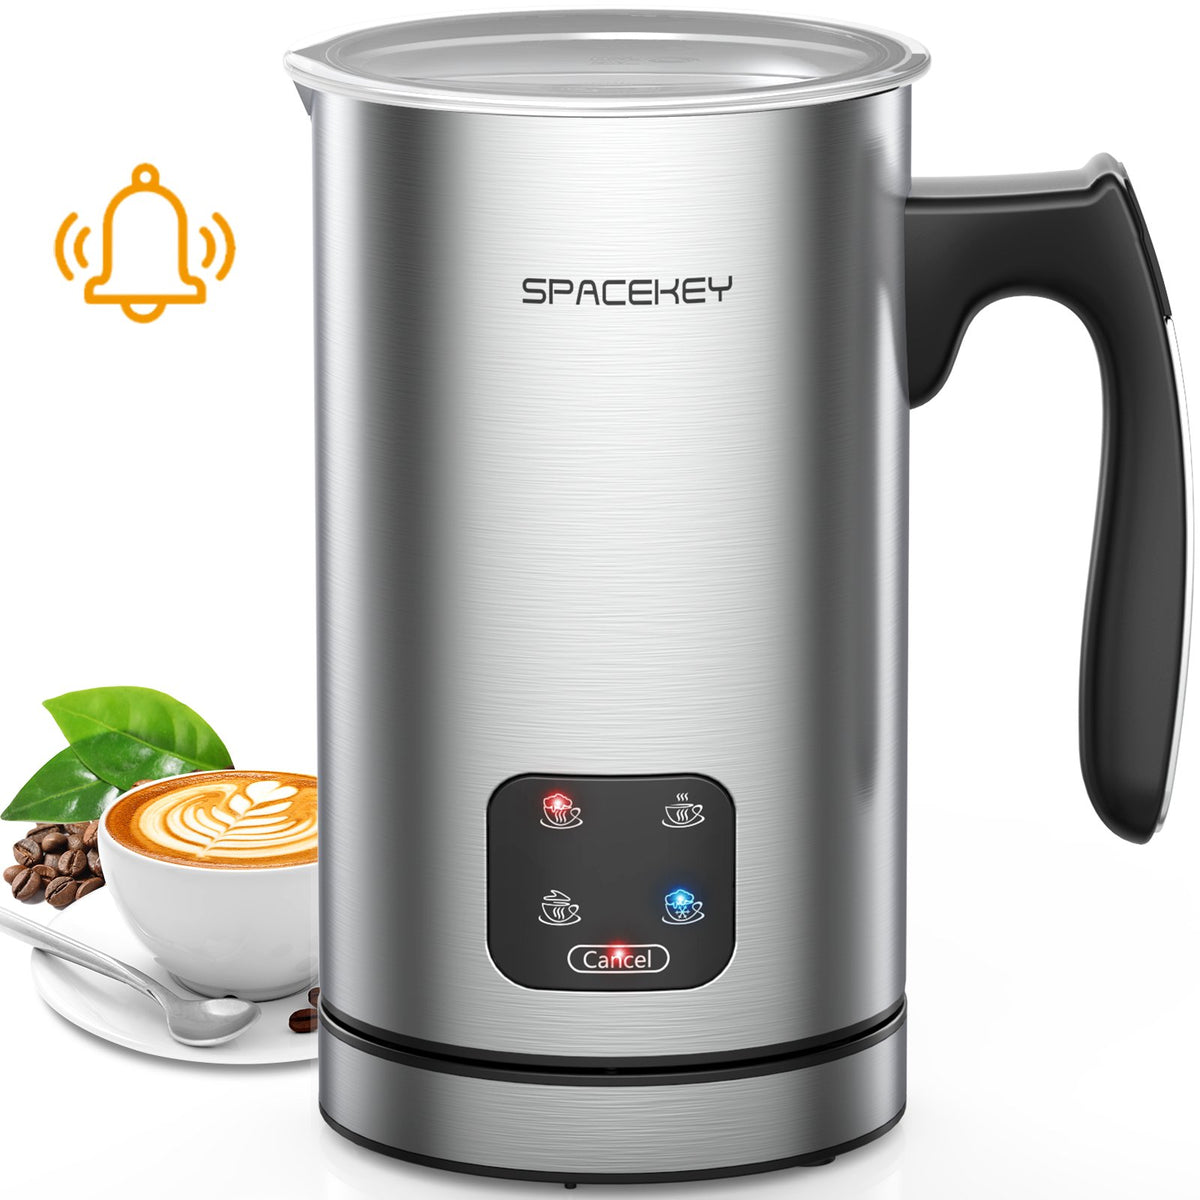 Secura Electric Milk Frother, Automatic Milk Steamer Warm or Cold Foam Maker for Coffee, Cappuccino, Latte, Stainless Steel Milk